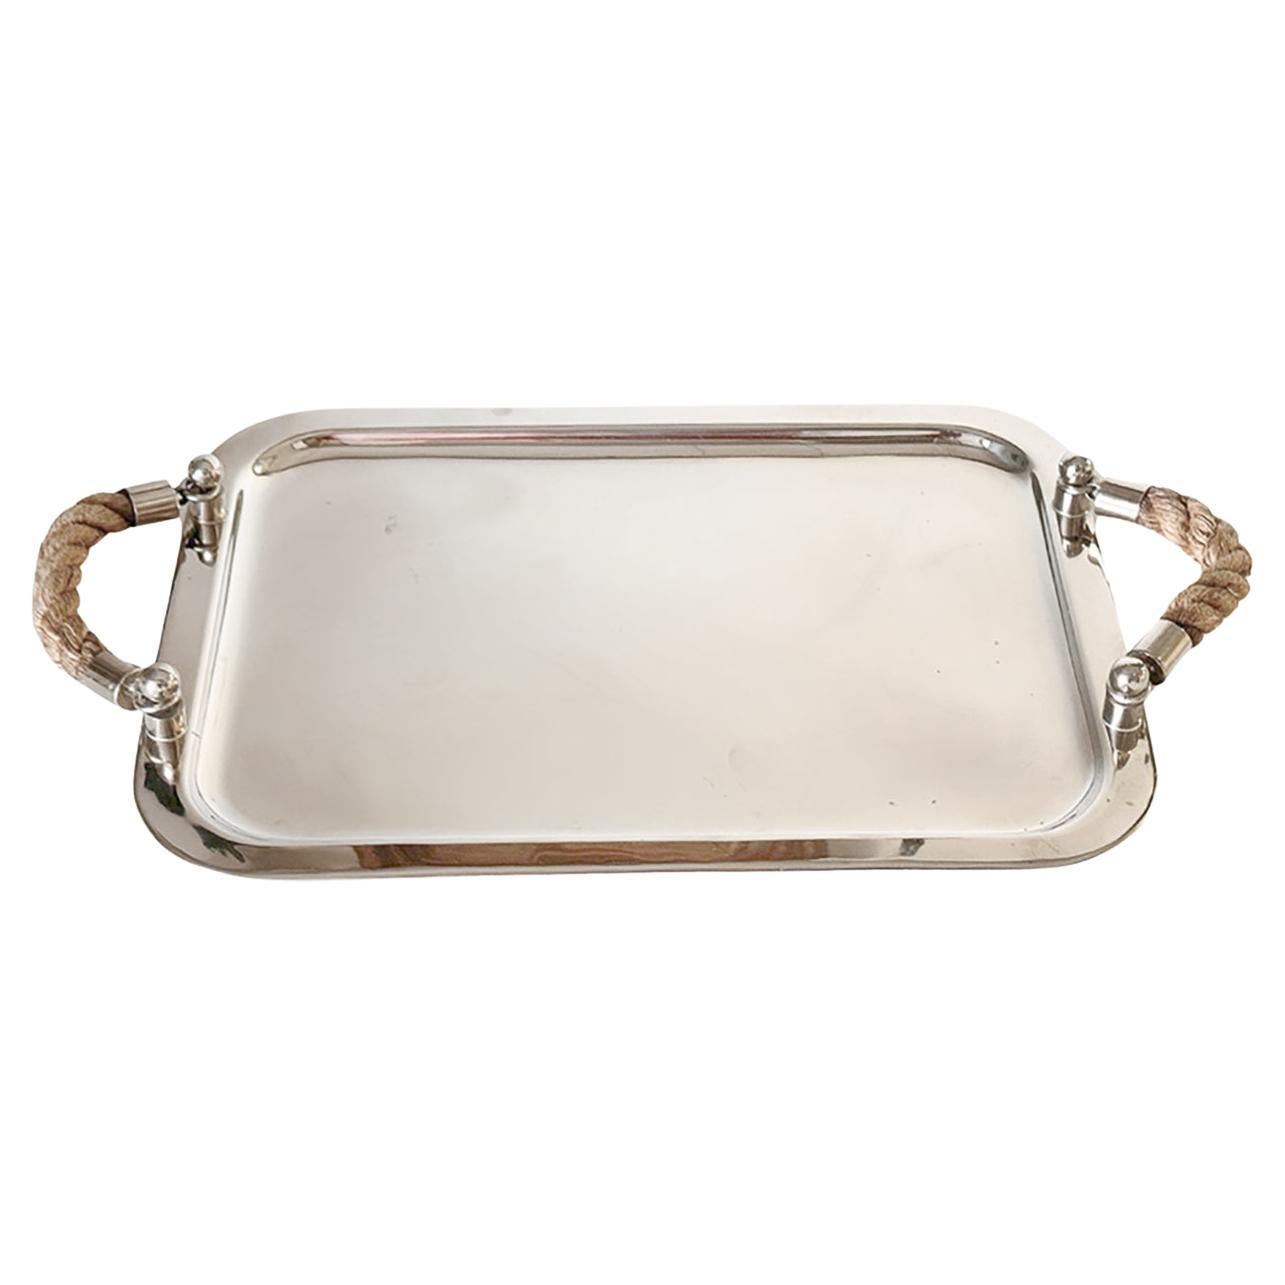 Yachting Serving Tray With Rope Handles High Quality Chrome Silver Color 1970 For Sale